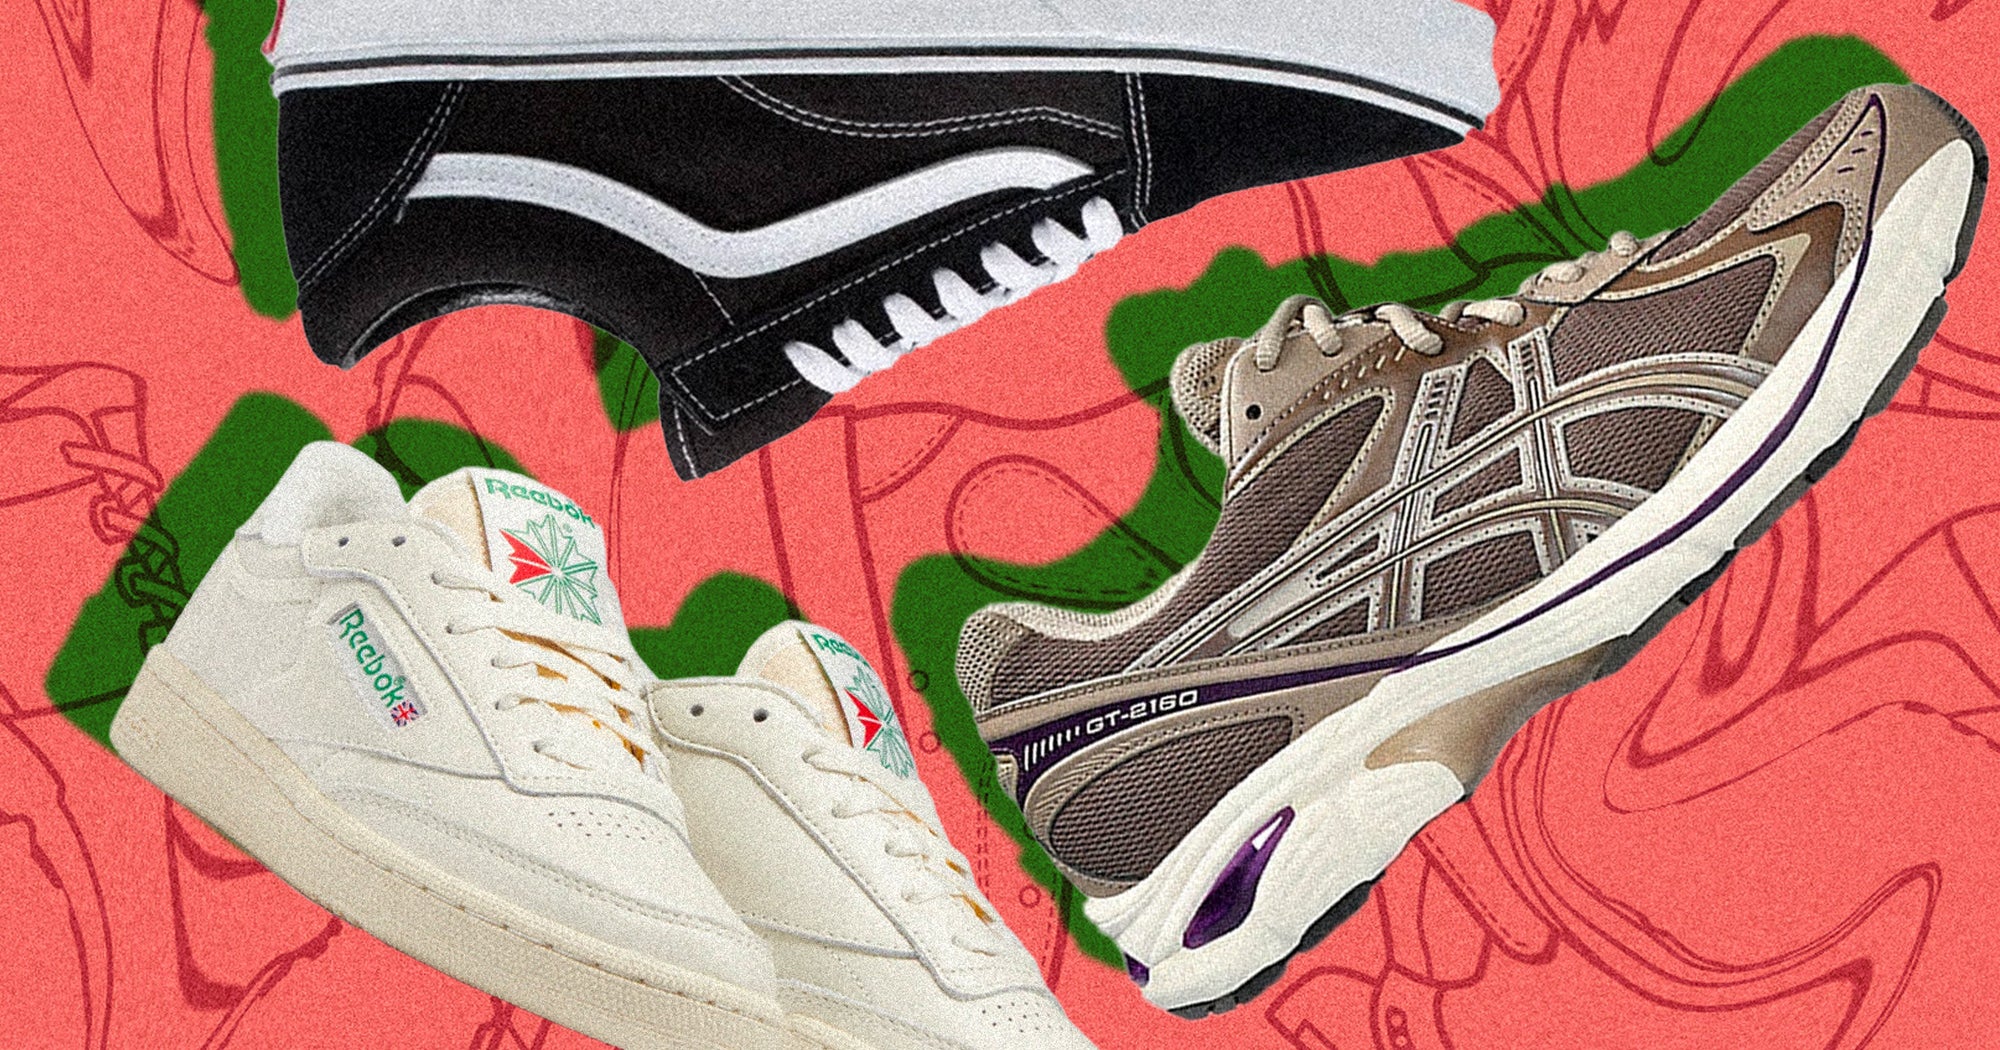 Best Retro 90s Style Sneakers To Shop